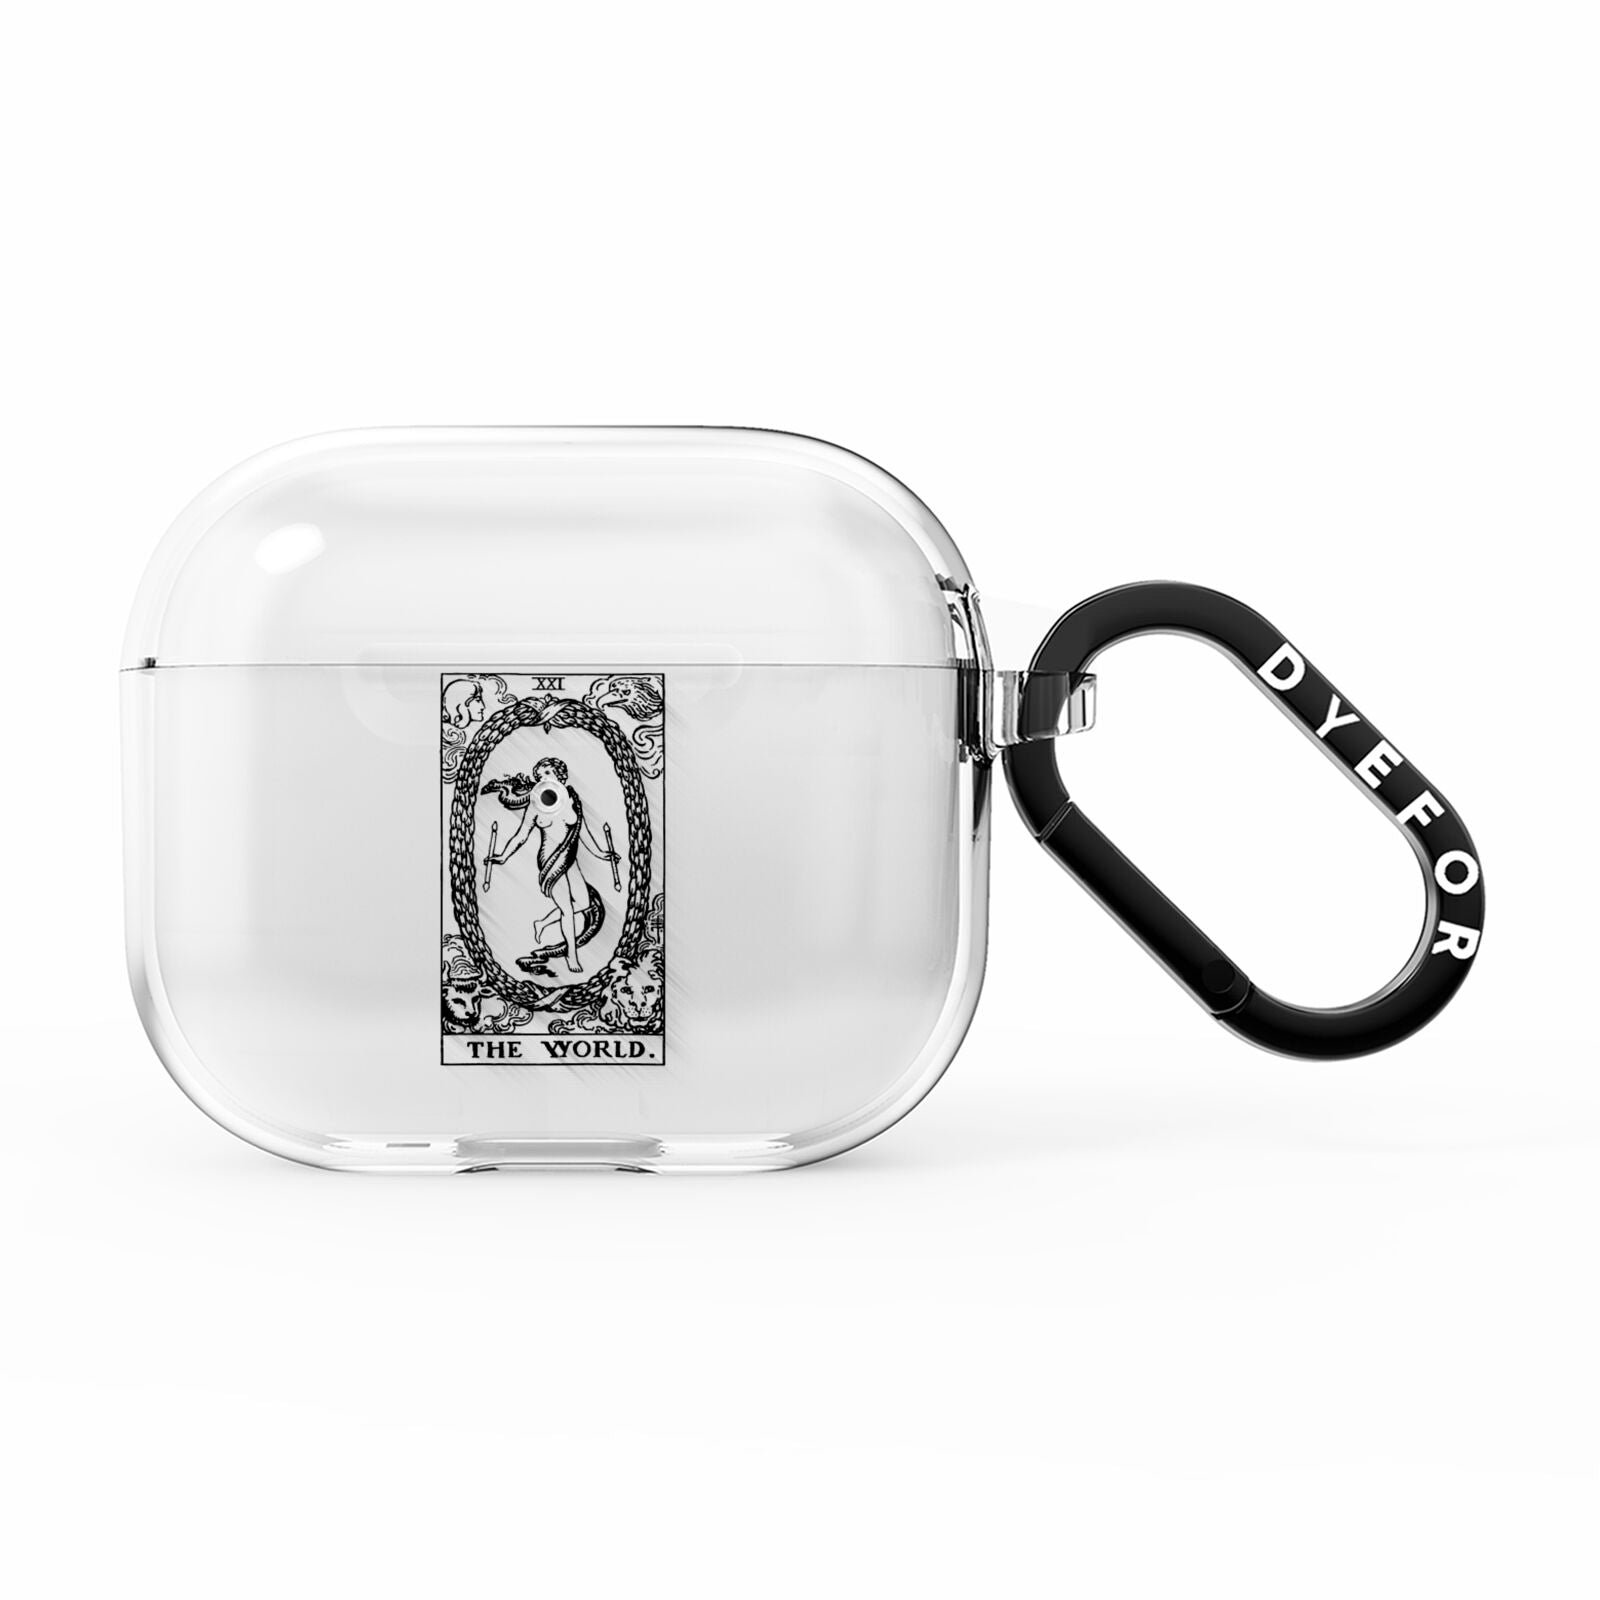 The World Monochrome AirPods Clear Case 3rd Gen